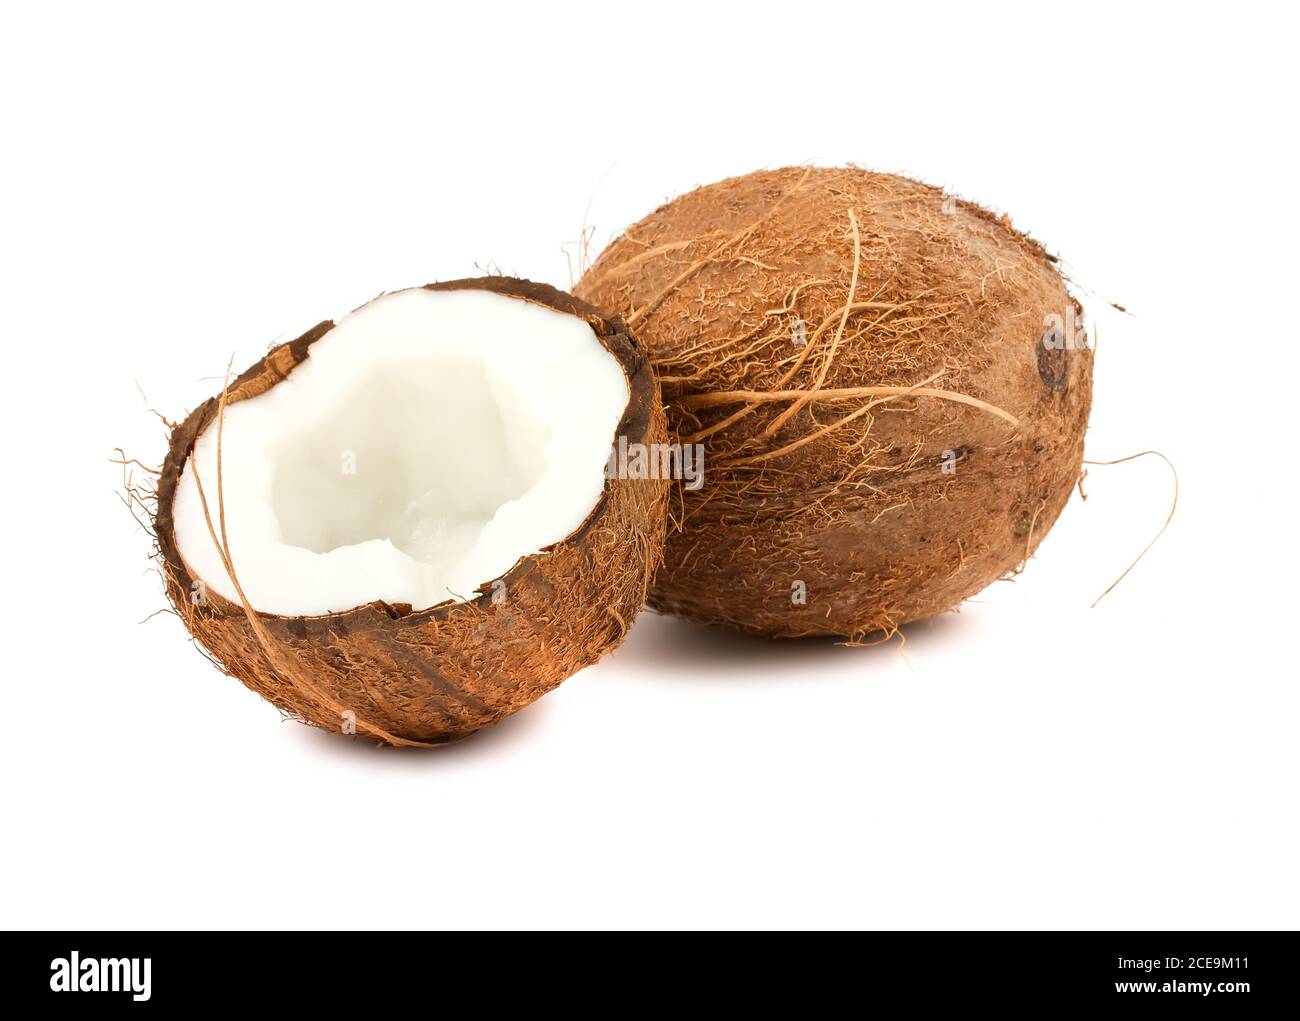 Full and half of coconut Stock Photo